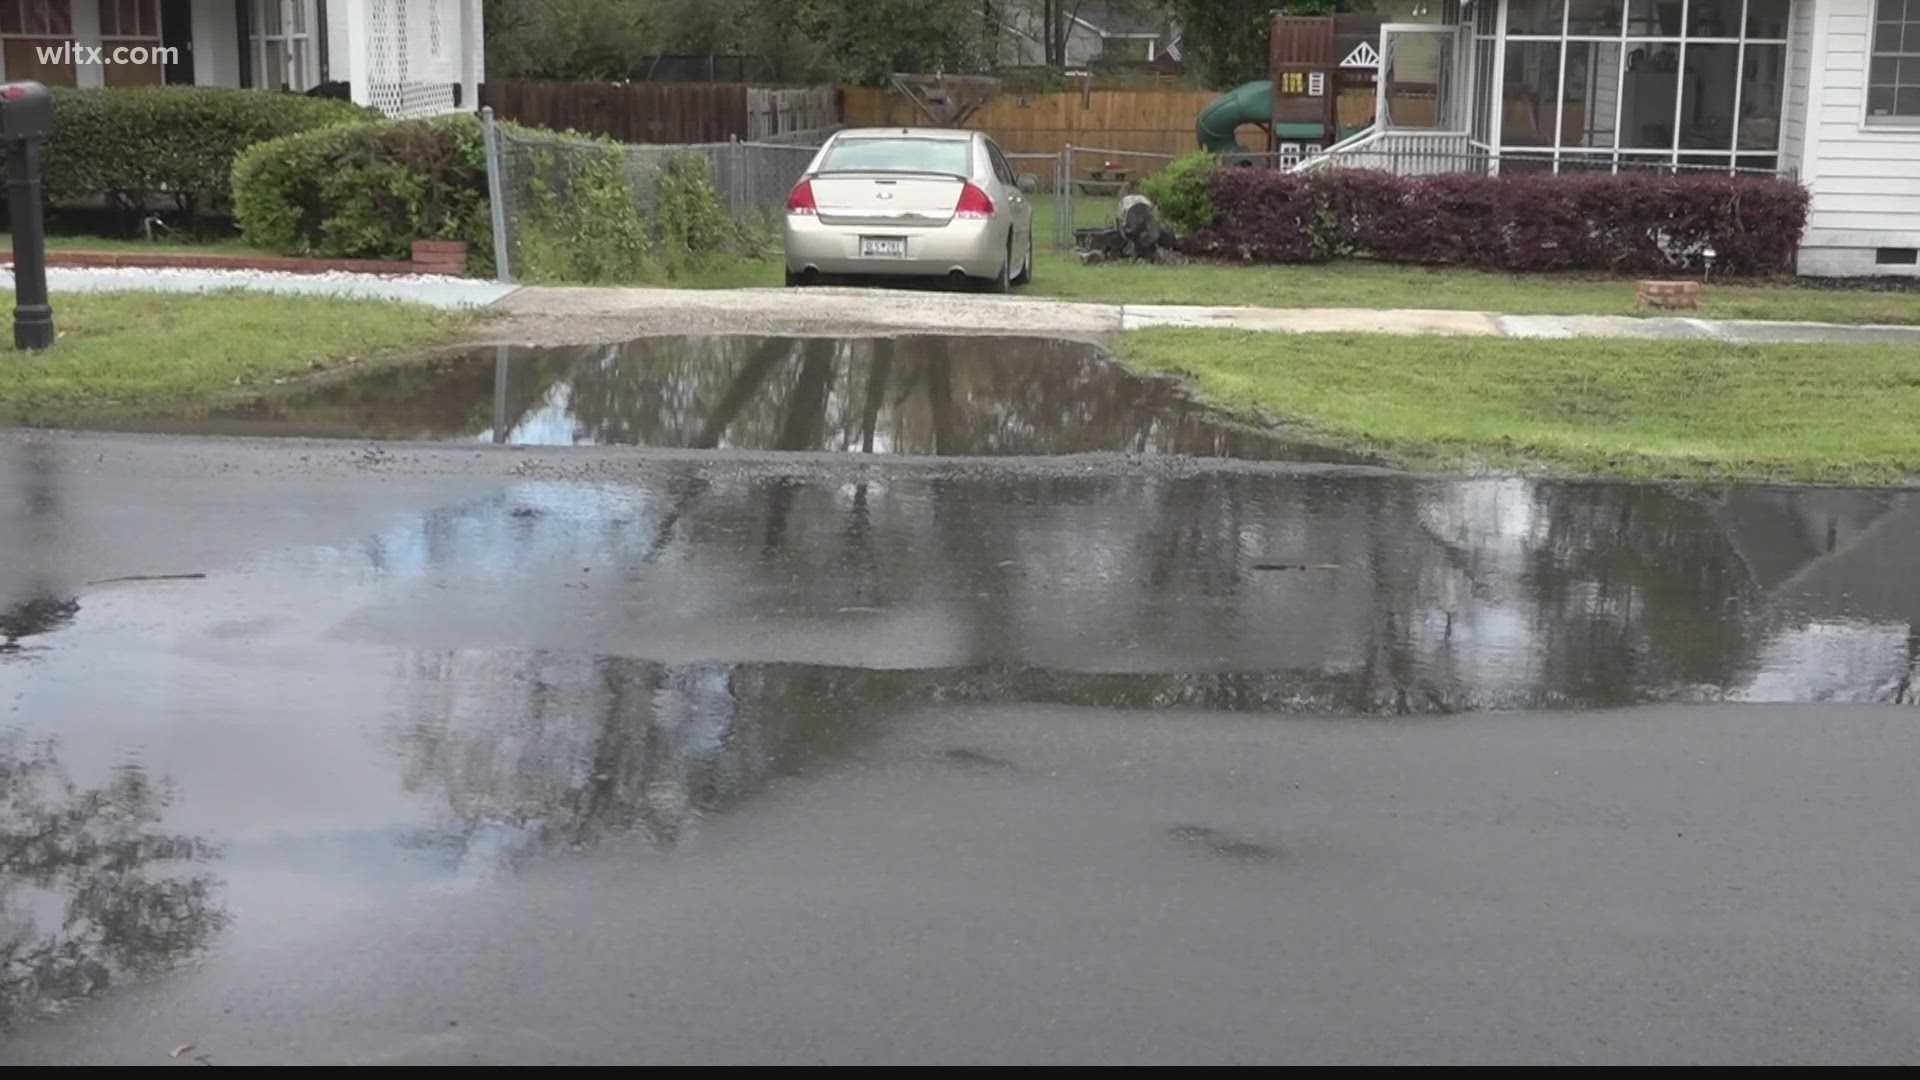 Residents say Hampton Street has been flooding every time it rains, spilling into their yards.